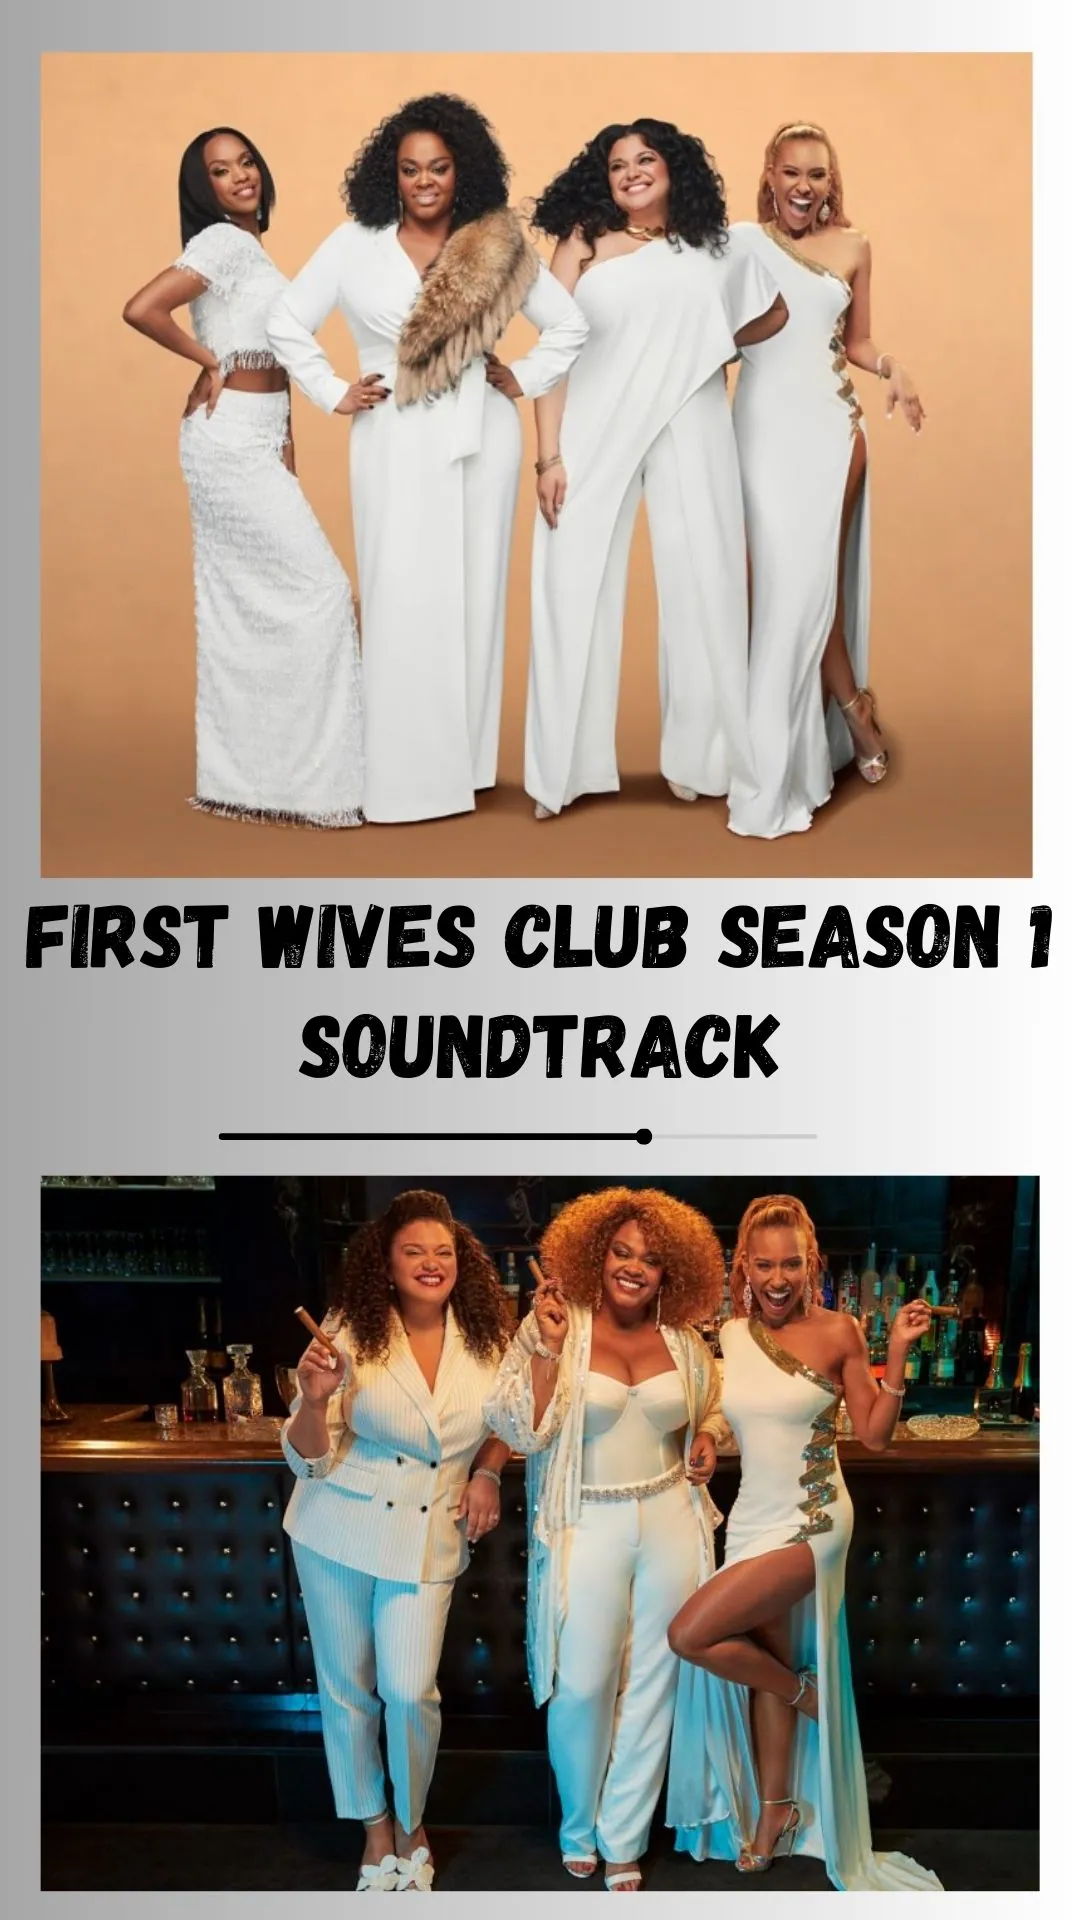 First Wives Club Season 1 Soundtrack